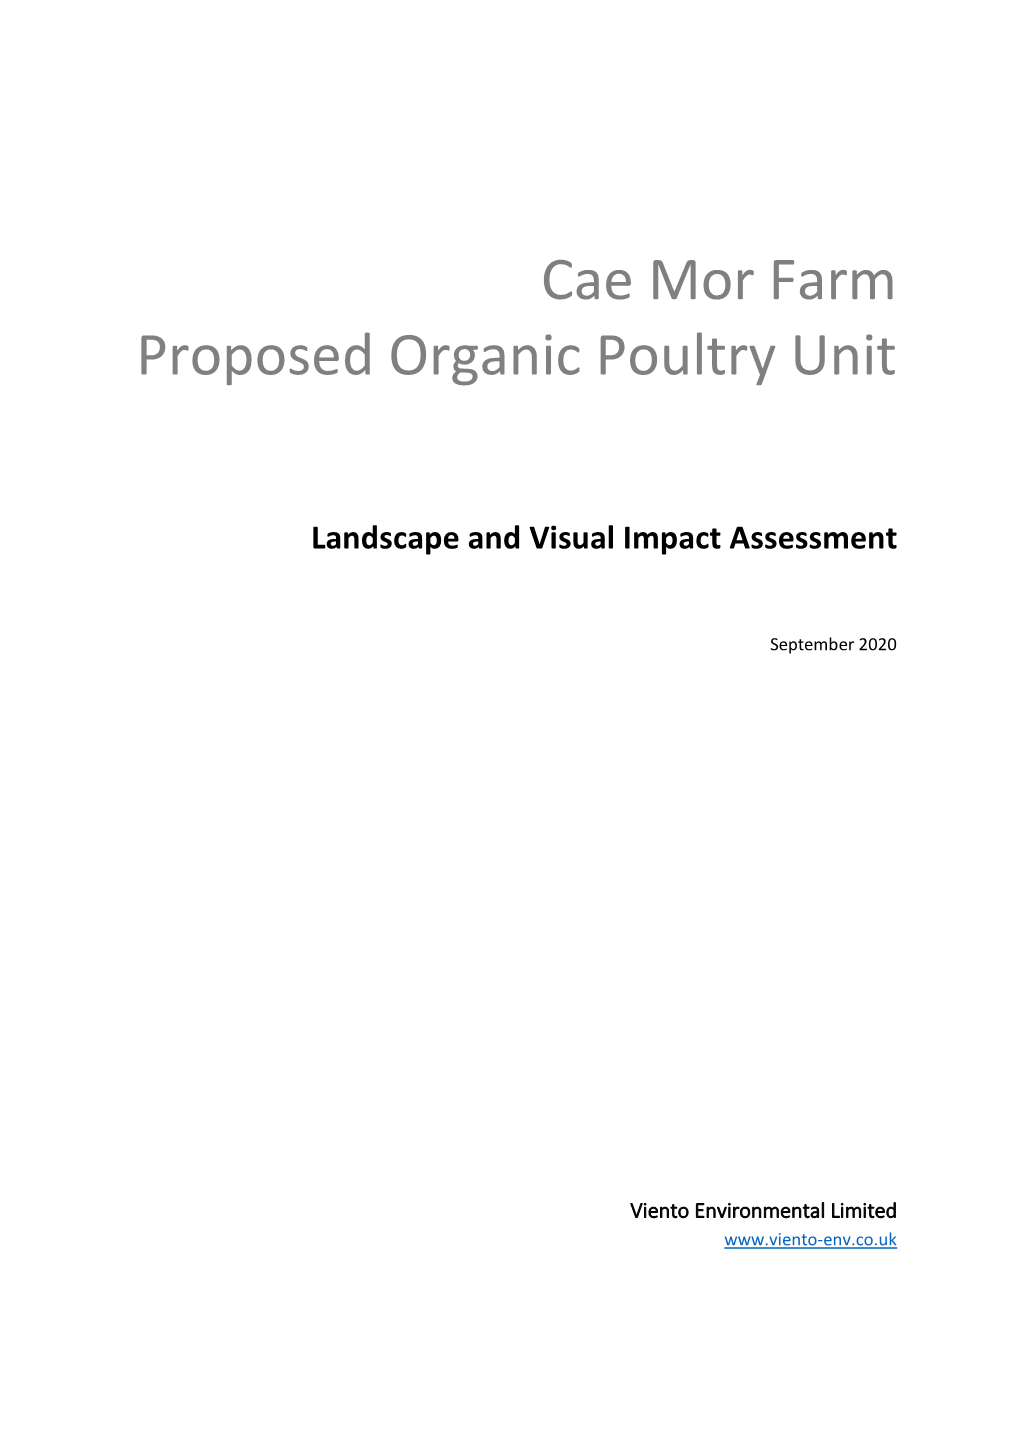 Cae Mor Farm Proposed Organic Poultry Unit